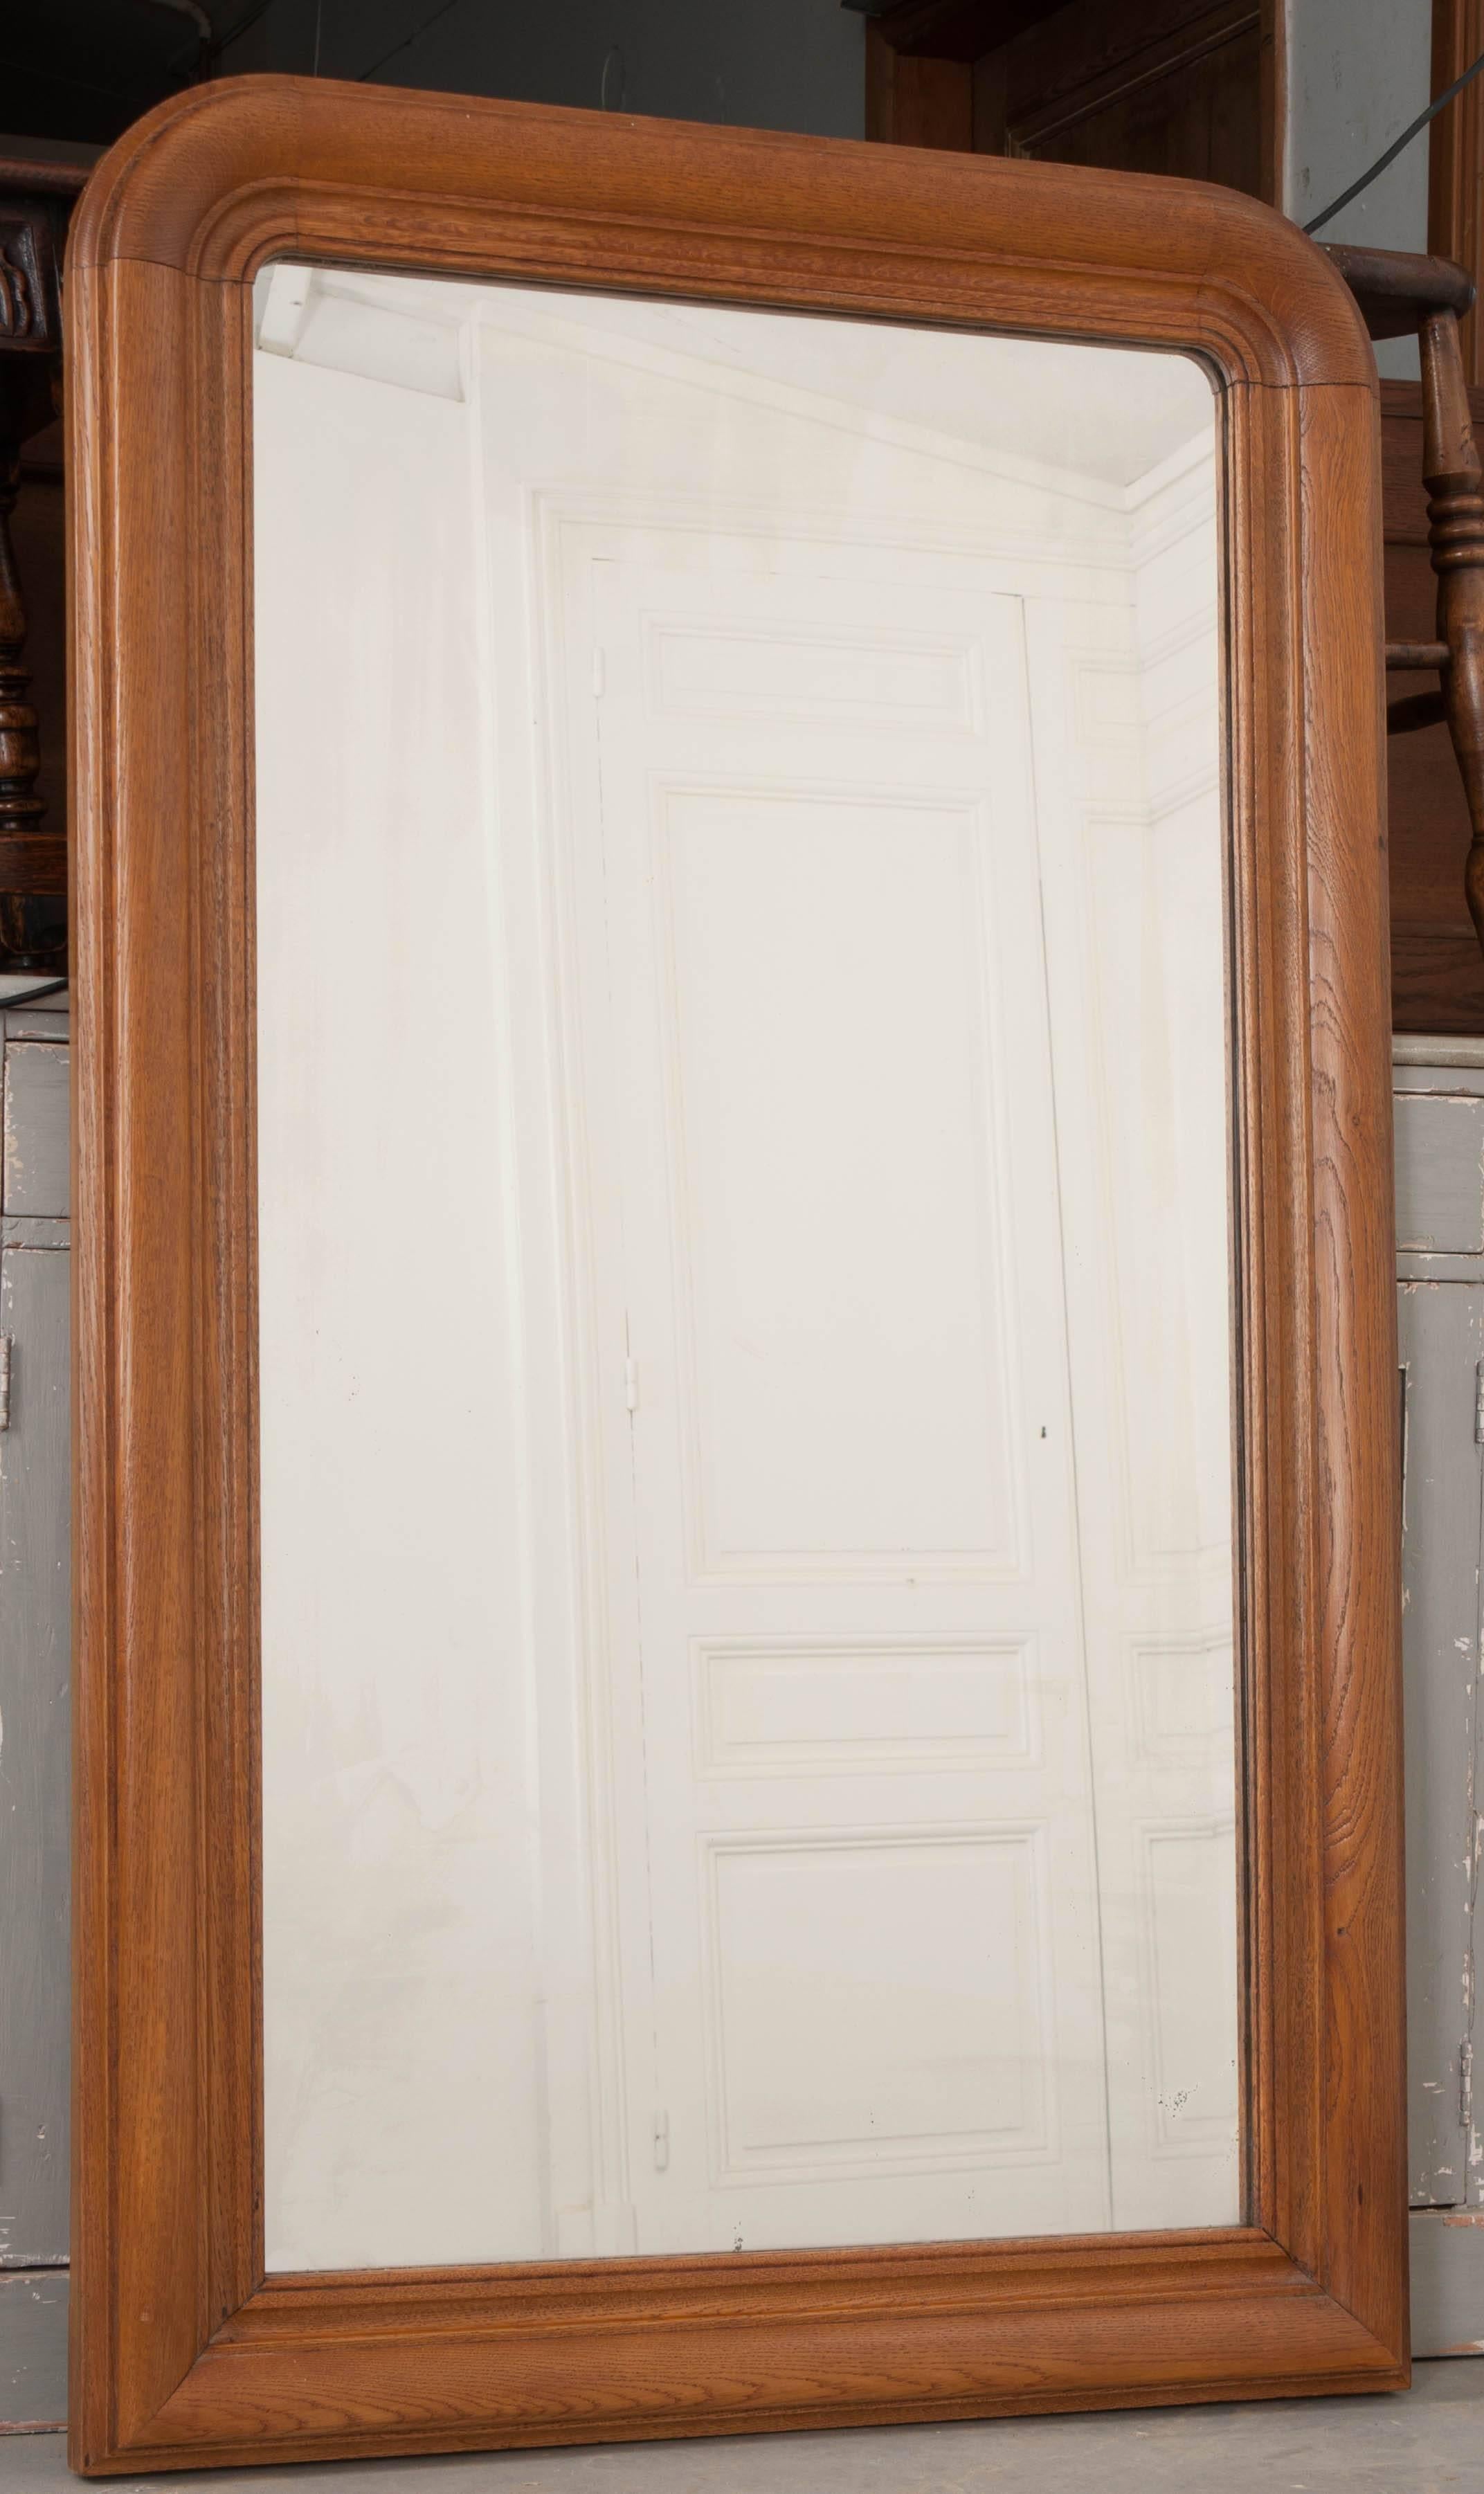 A classic Louis Philippe mirror from 19th century, France, with carved oak frame and original glass. Often finished in a metallic gilt, this unique antique mirror has been left in its natural state, with extraordinary patina acquired from years of